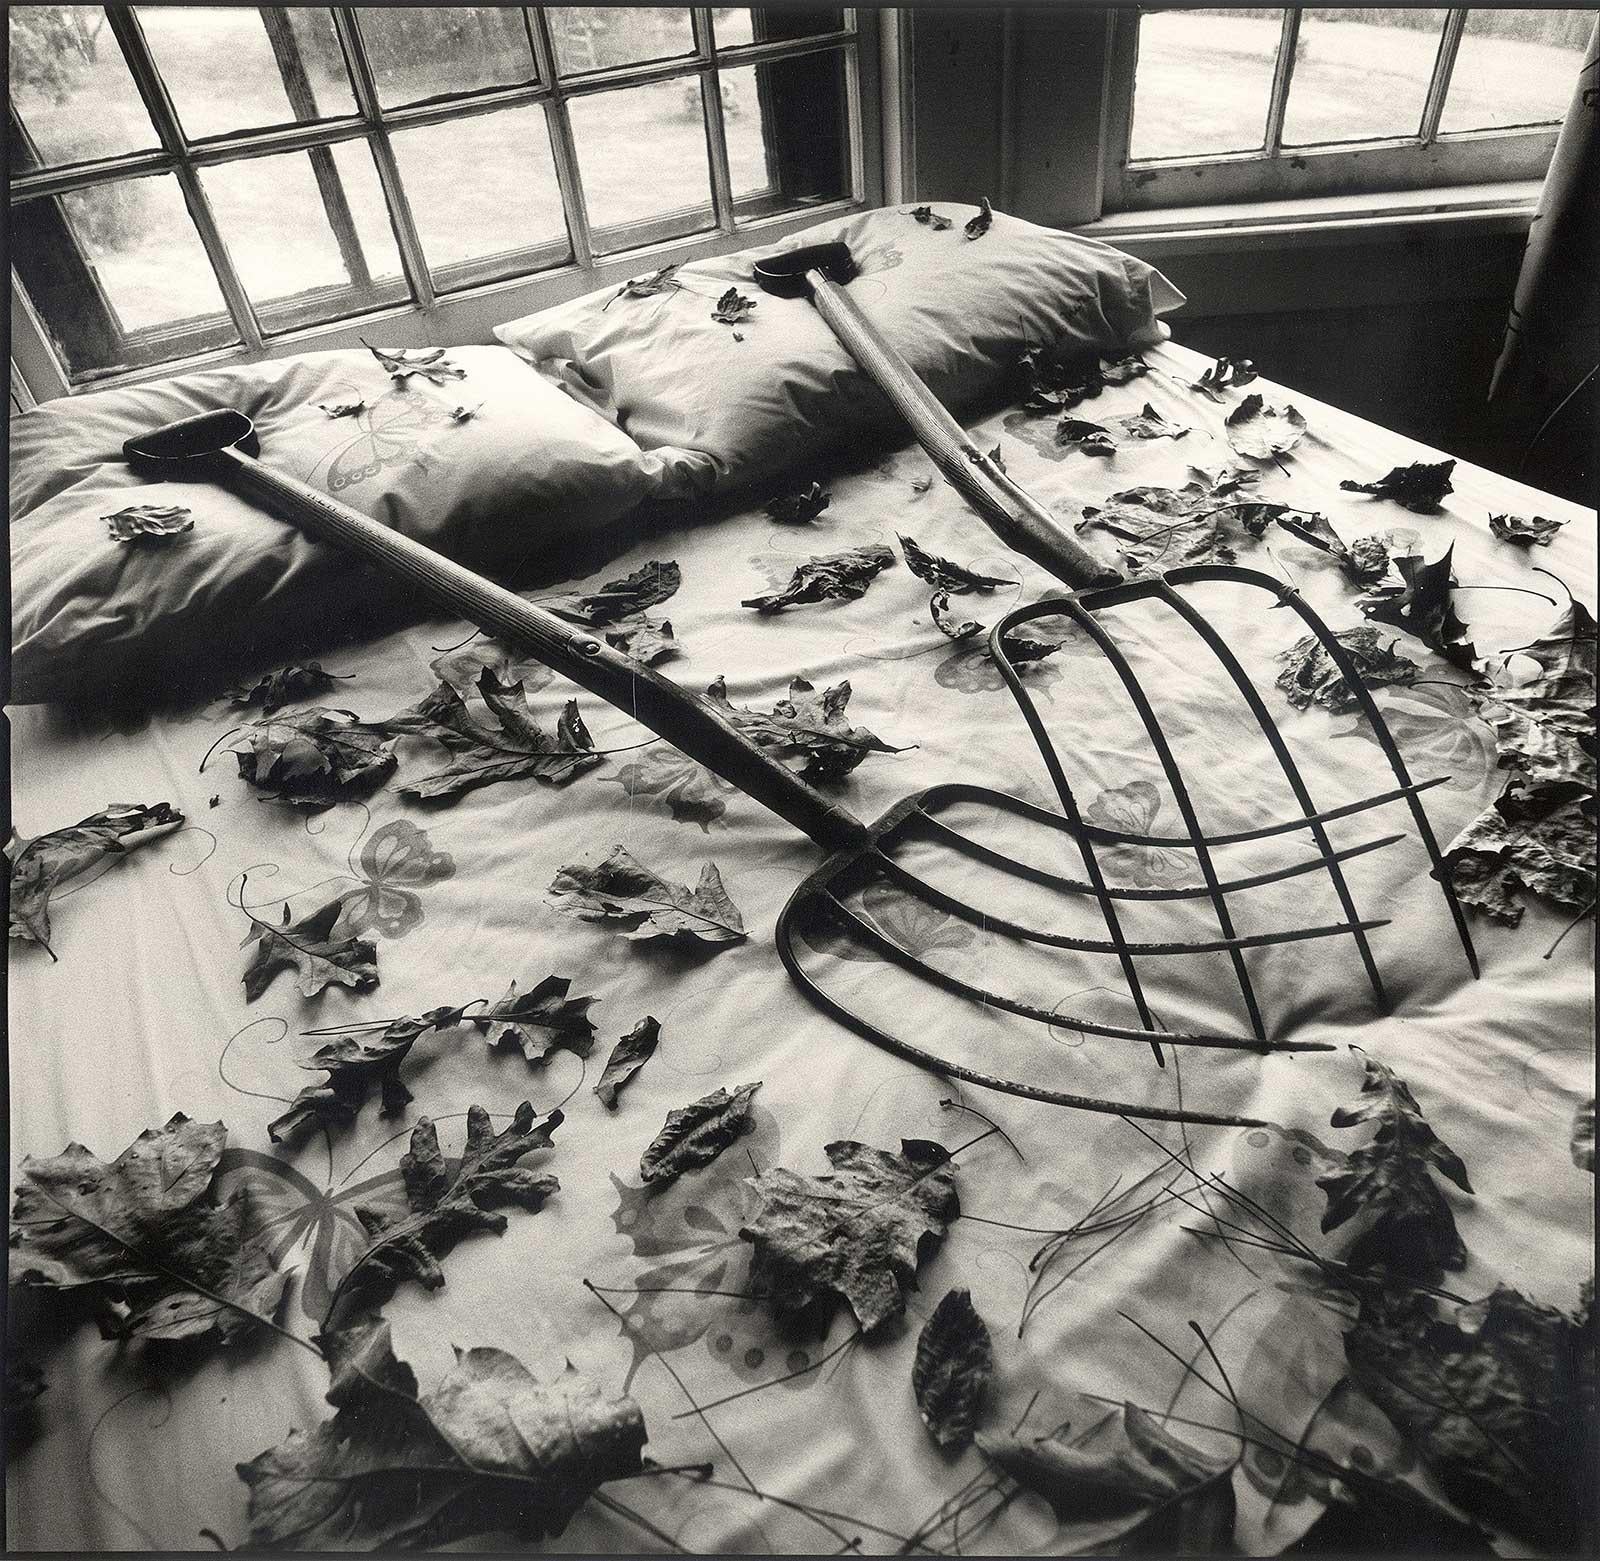 Arthur Tress Still-Life Photograph - Making Leaves (a sexy still life where 2 rakes and some leaves turn up the heat)